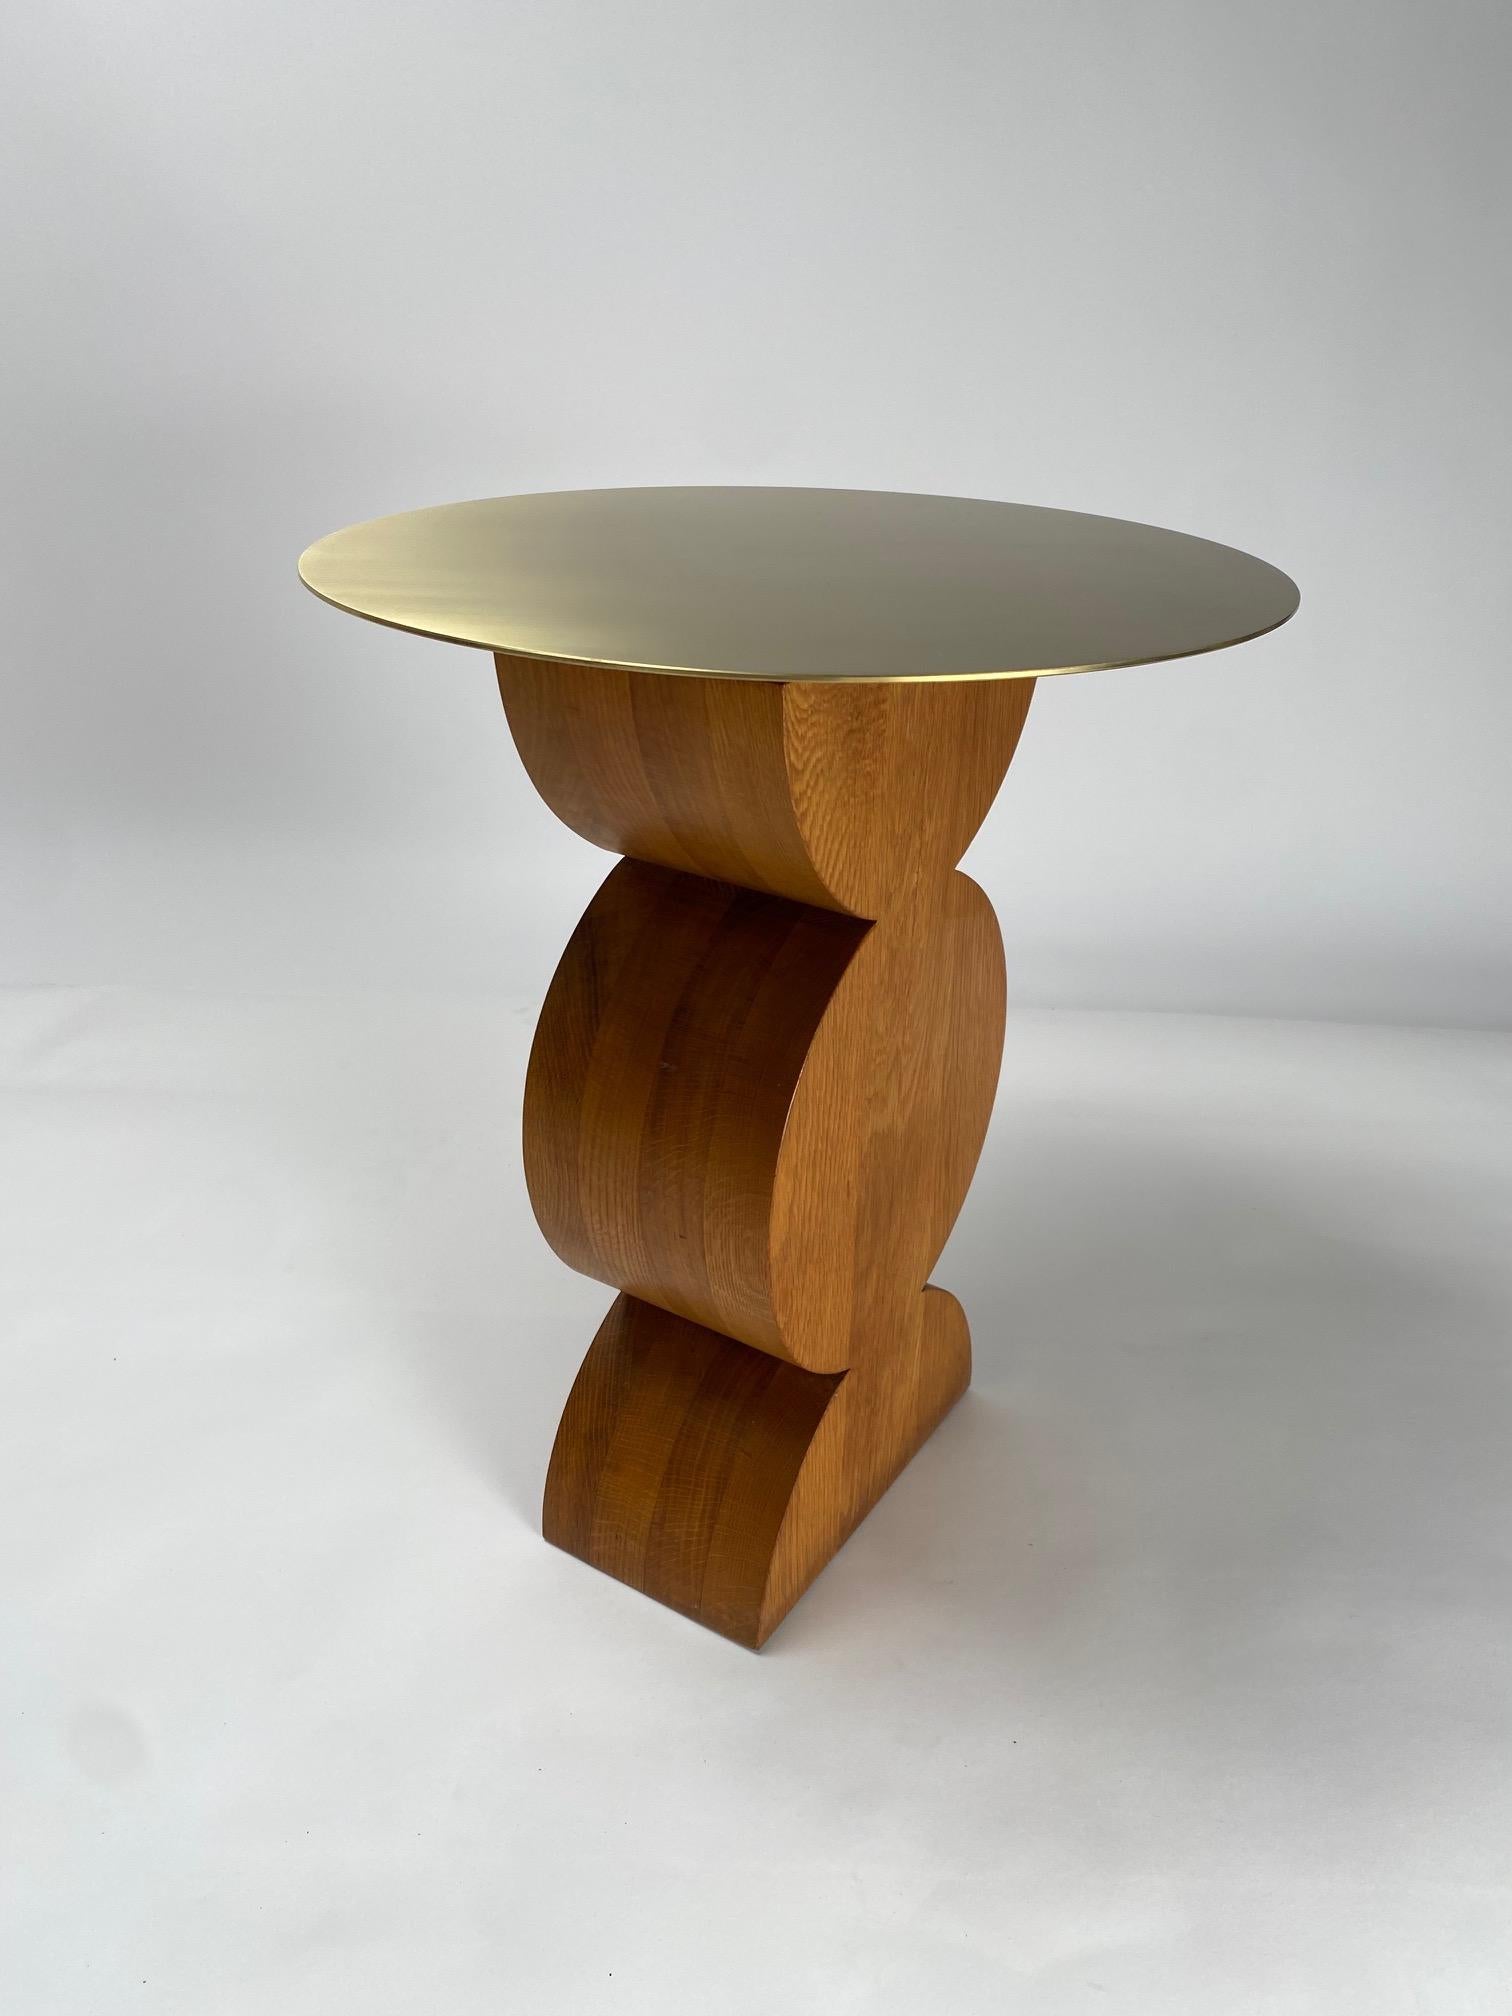 Constantin wood side table by Gavina, Homage to Brancusi, 1971 (First Edition) For Sale 1